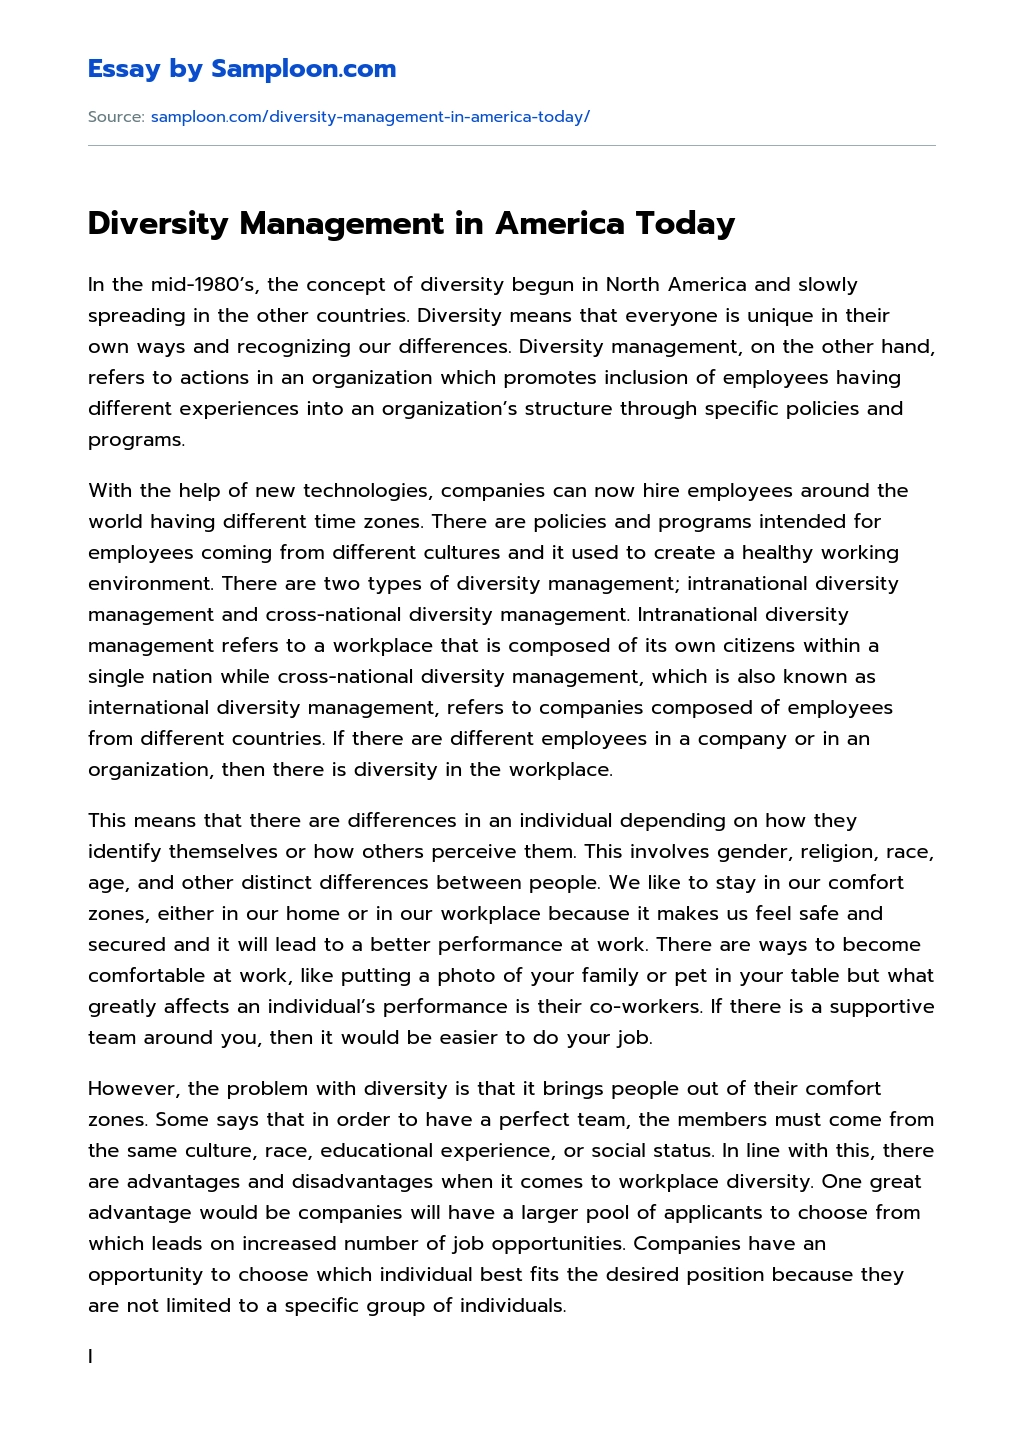 Diversity Management in America Today essay